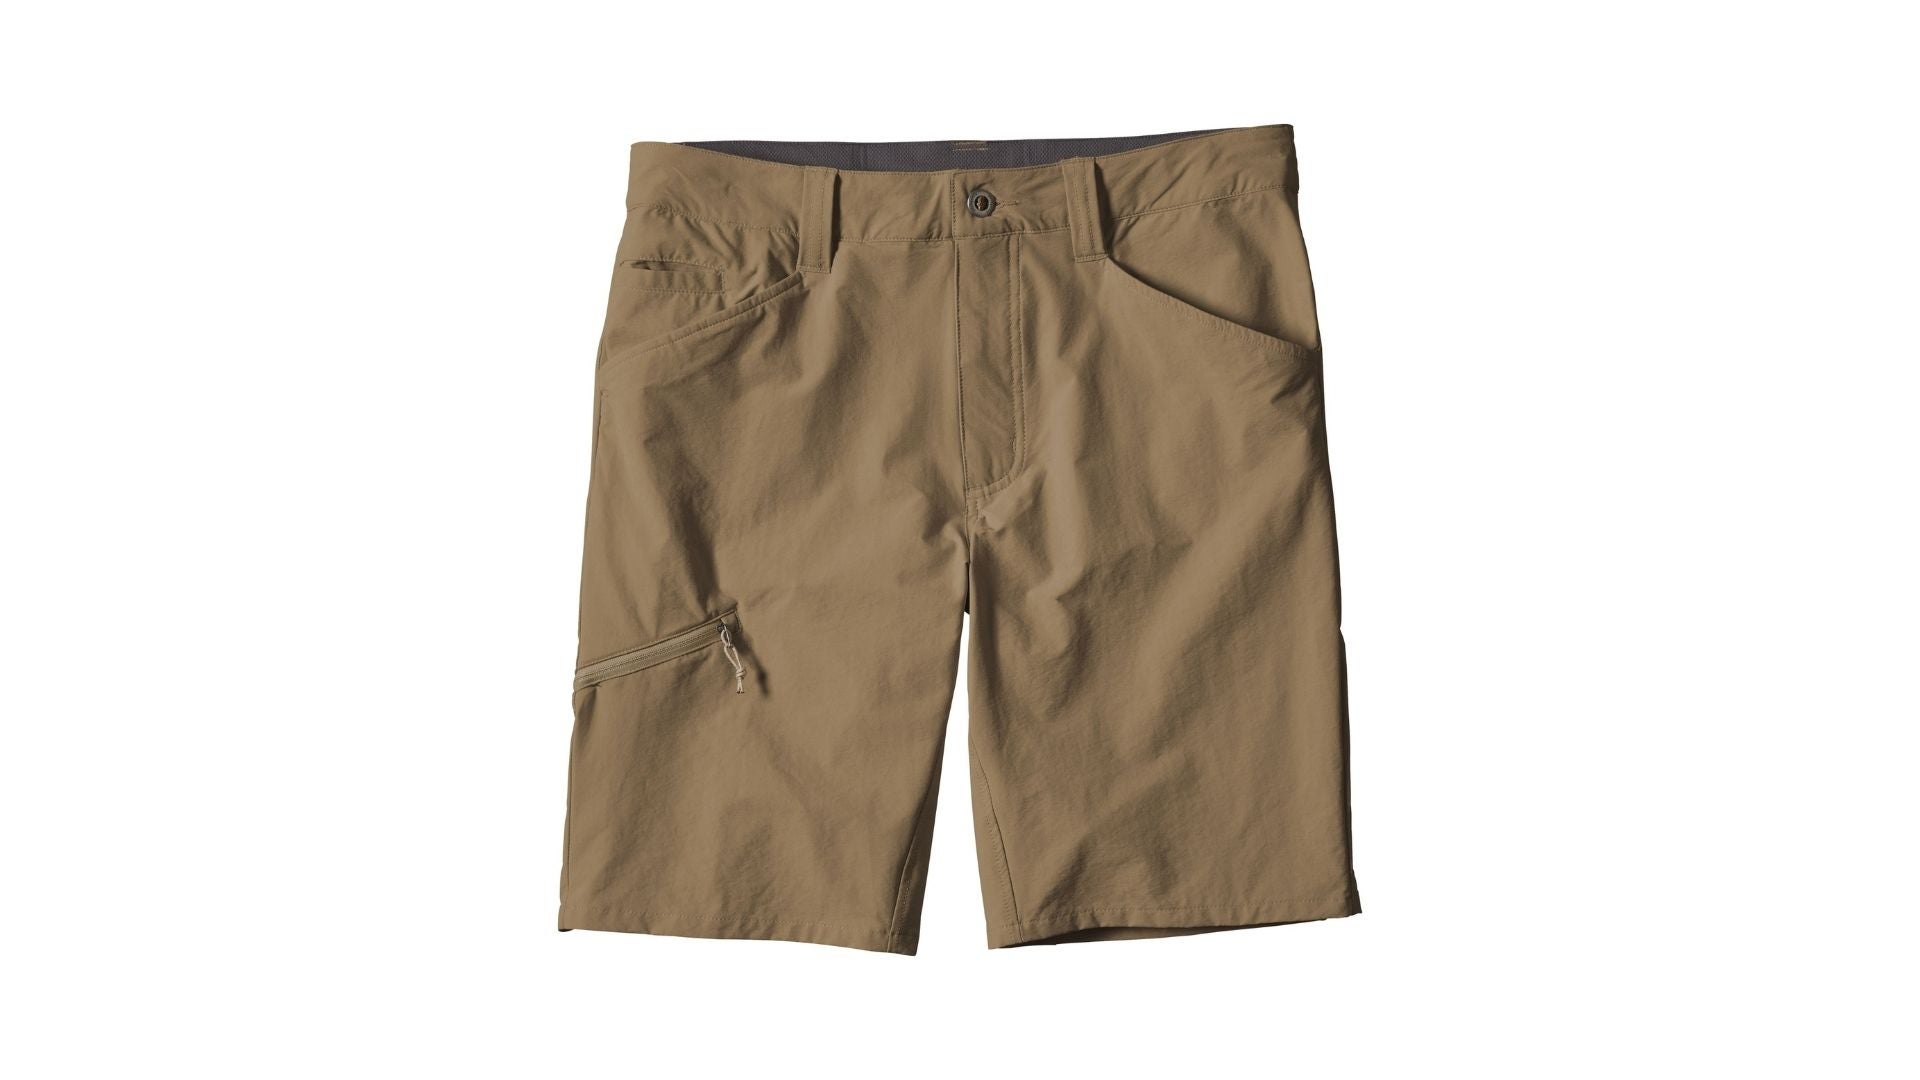 Best Hiking Shorts (Review & Buying Guide) in 2022 - Task & Purpose